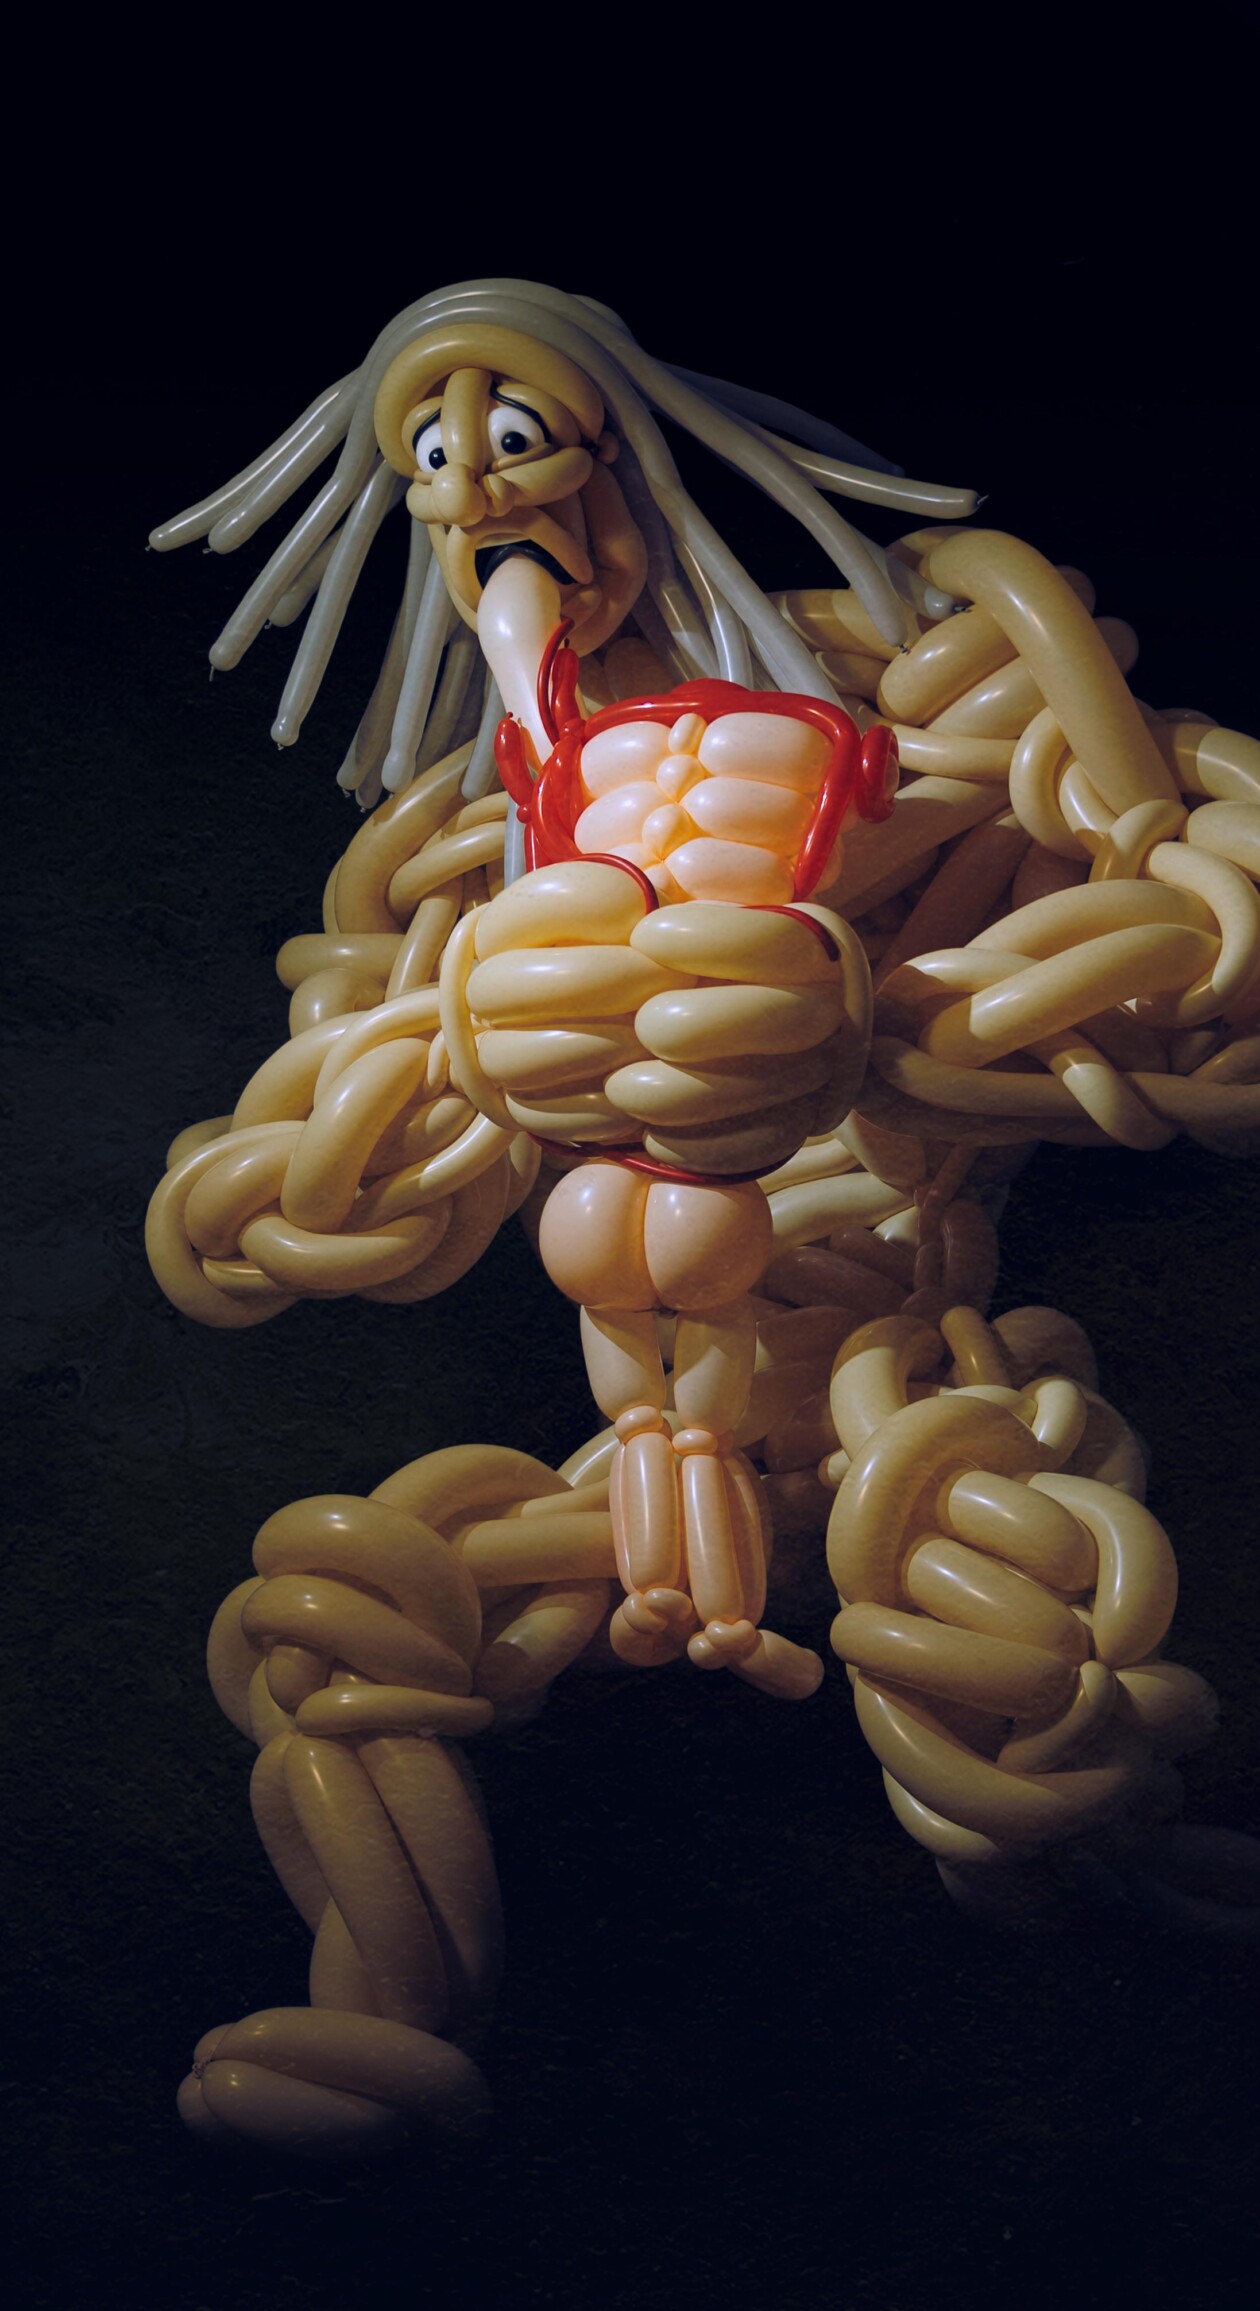 Incredible Balloon Sculpture Inspired By Francisco Goya's Painting Saturn Devouring His Son, Designed By Dj Morrow